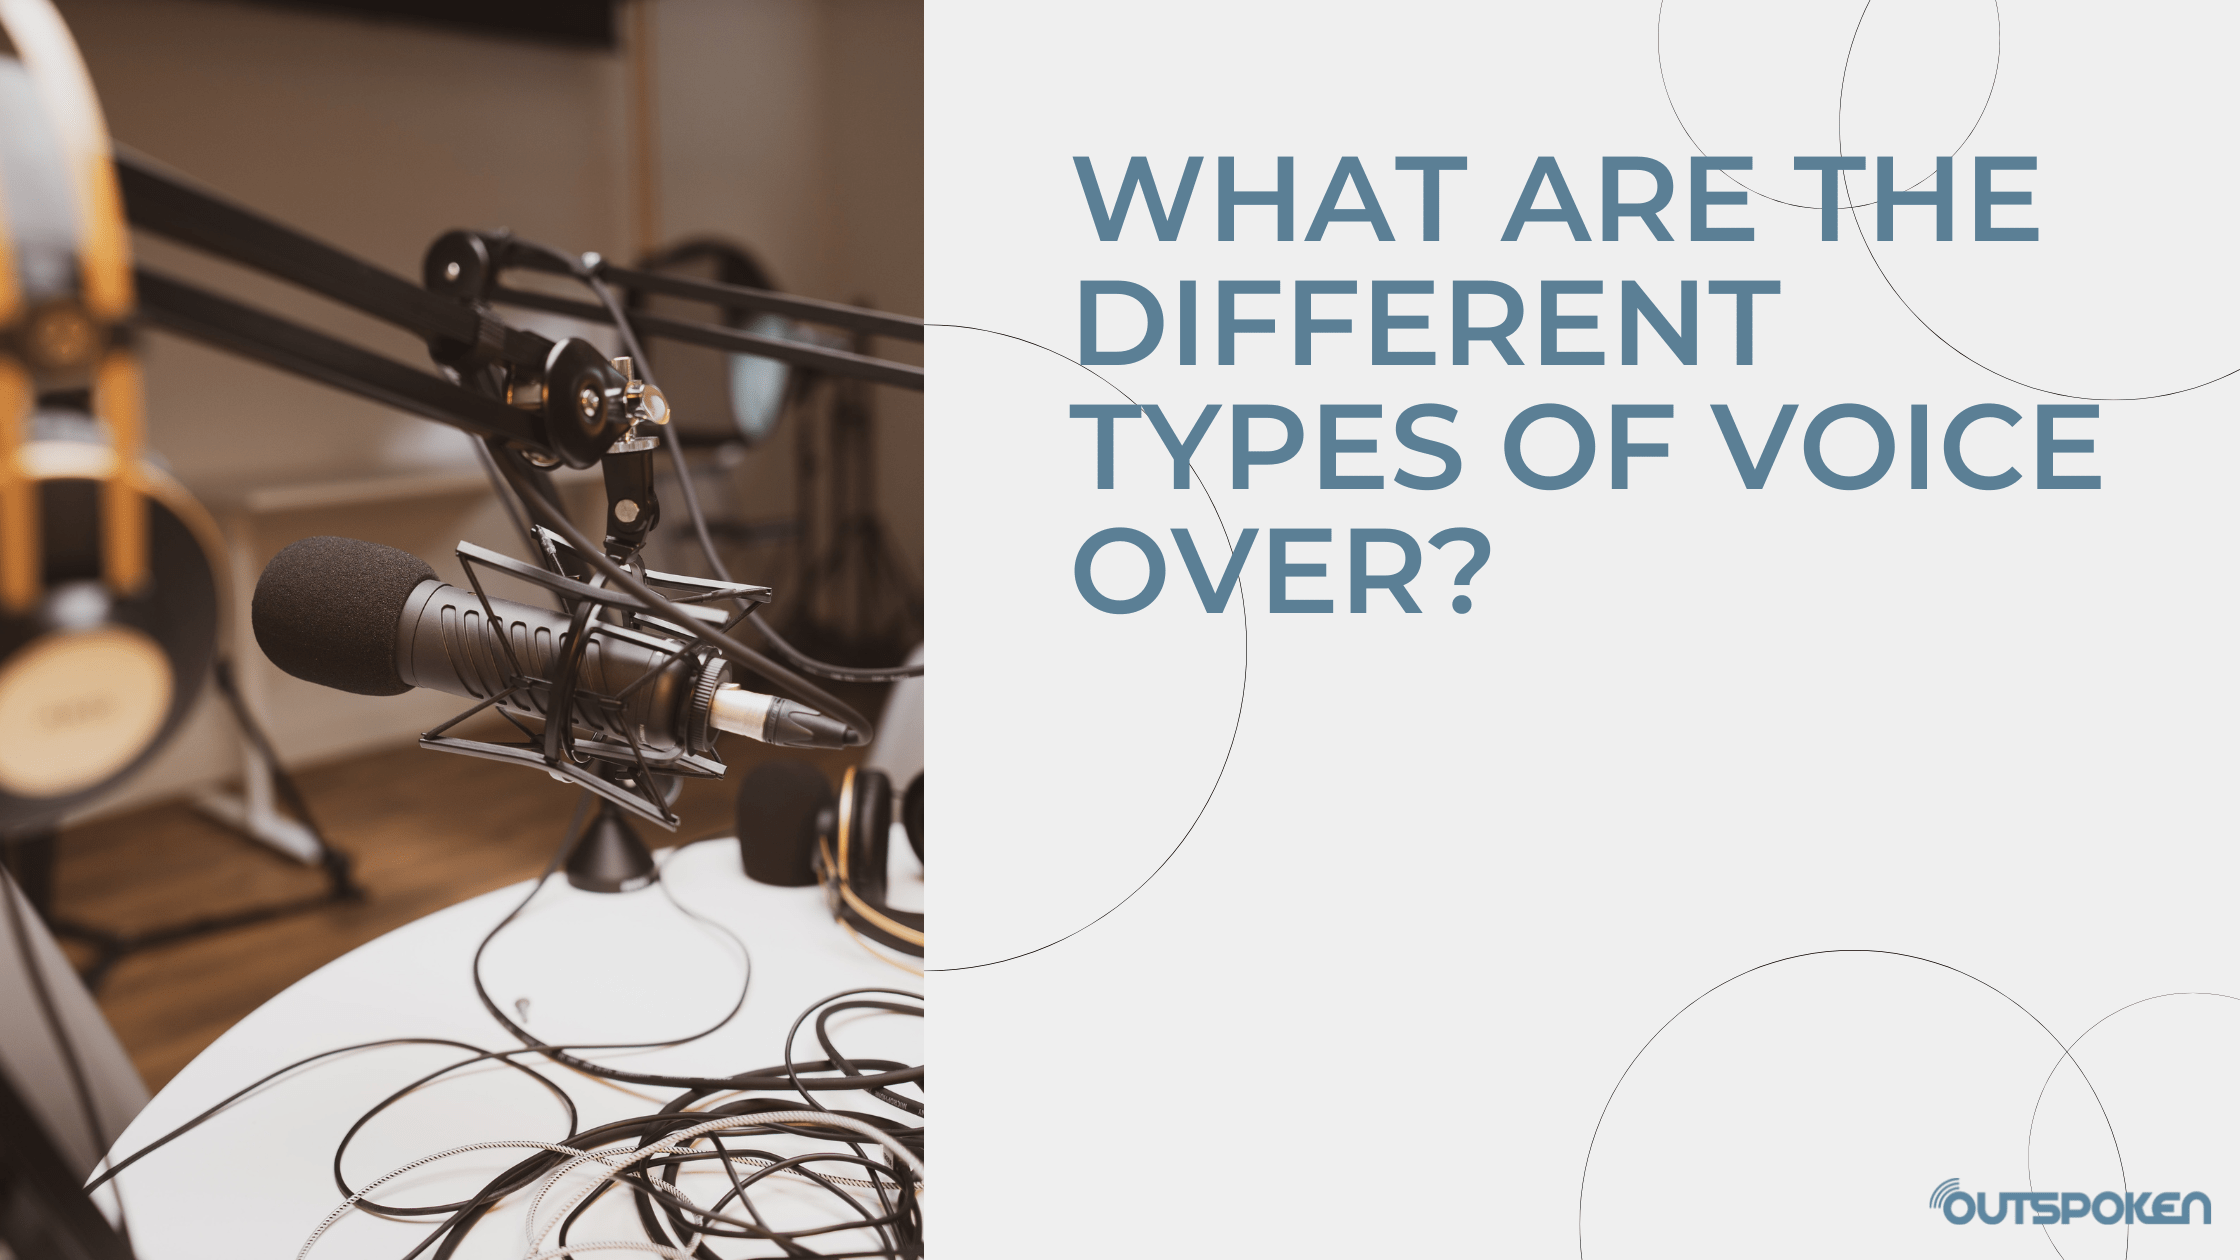 What Are The Different Types of Voice Over?